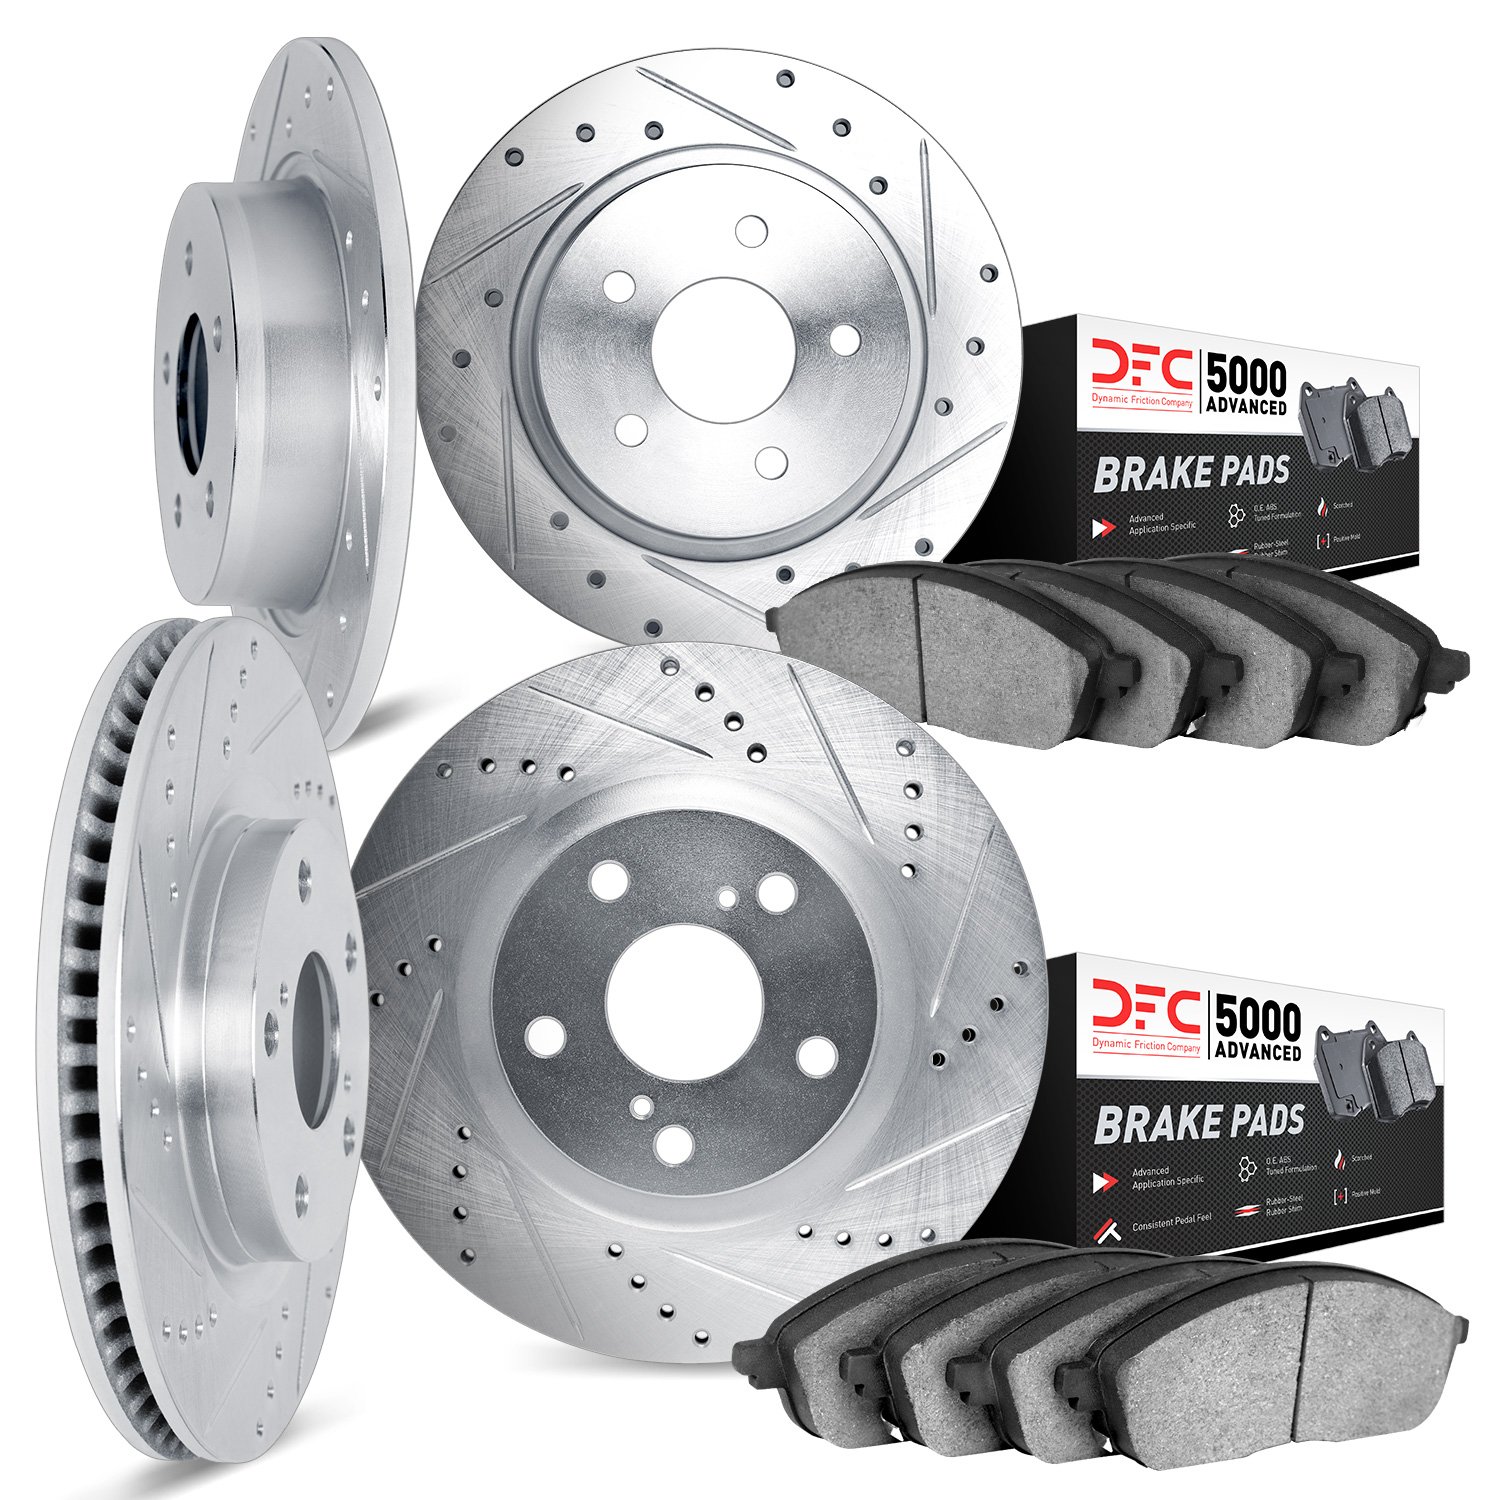 7504-54317 Drilled/Slotted Brake Rotors w/5000 Advanced Brake Pads Kit [Silver], 2001-2002 Ford/Lincoln/Mercury/Mazda, Position: